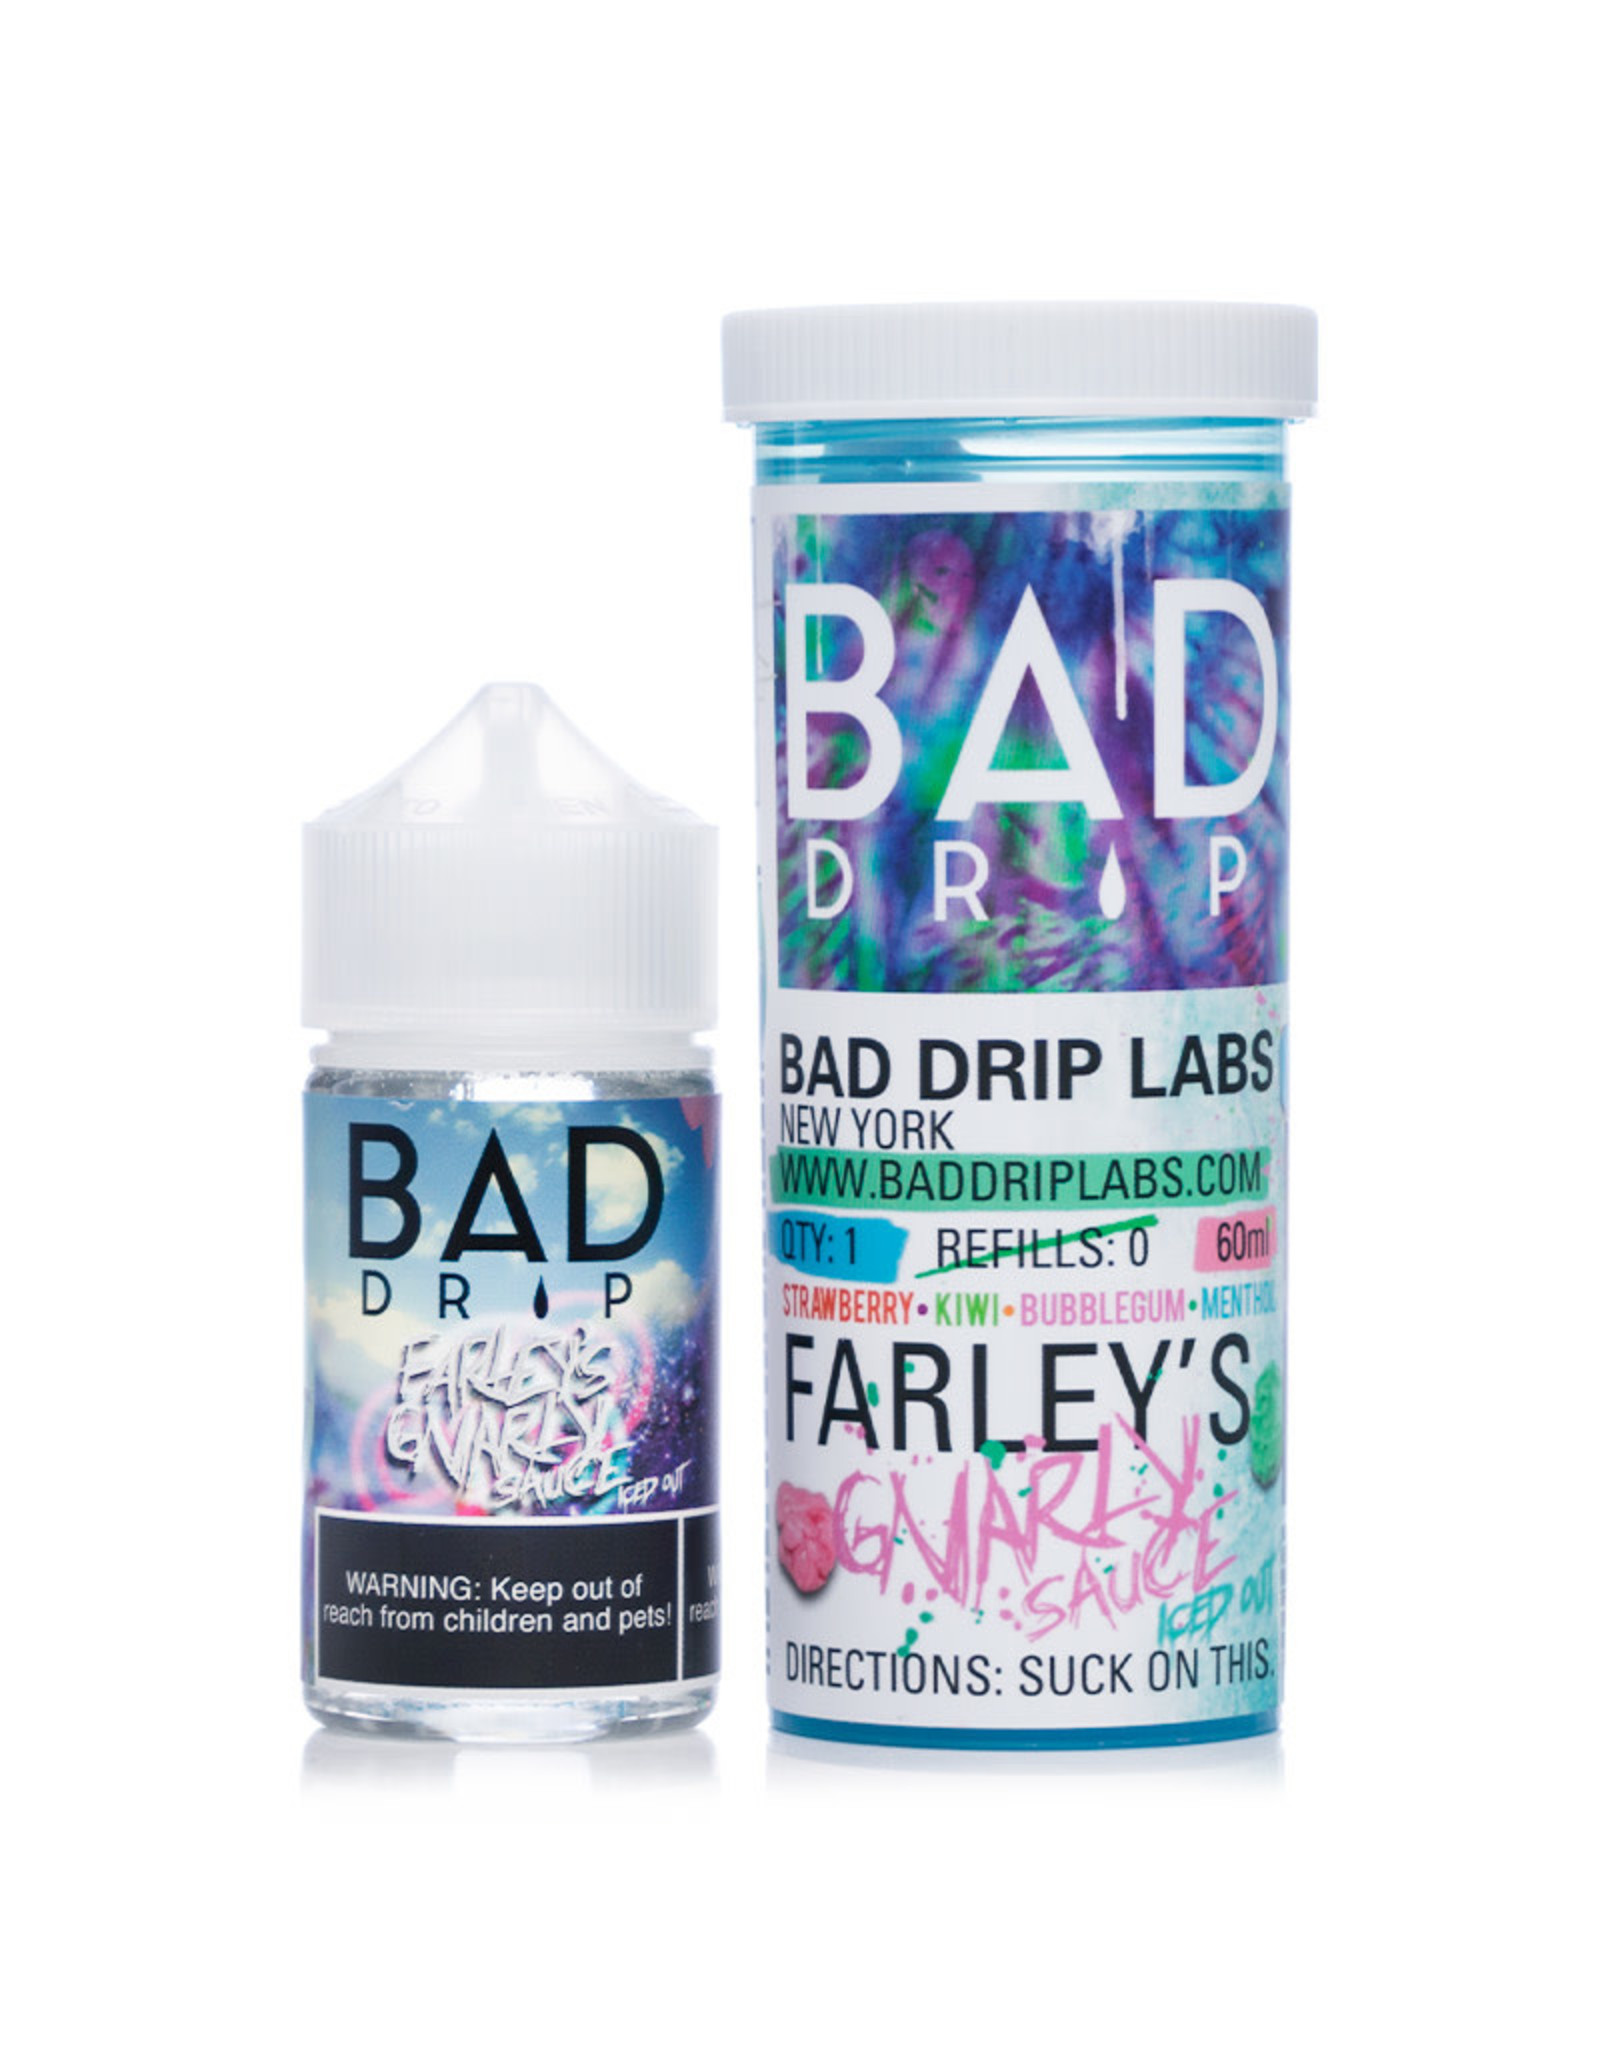 Bad Drip Juice Co. Bad Drip Juice Co. Farley’s Gnarly Sauce Ice’d Out 60 ML 6 MG